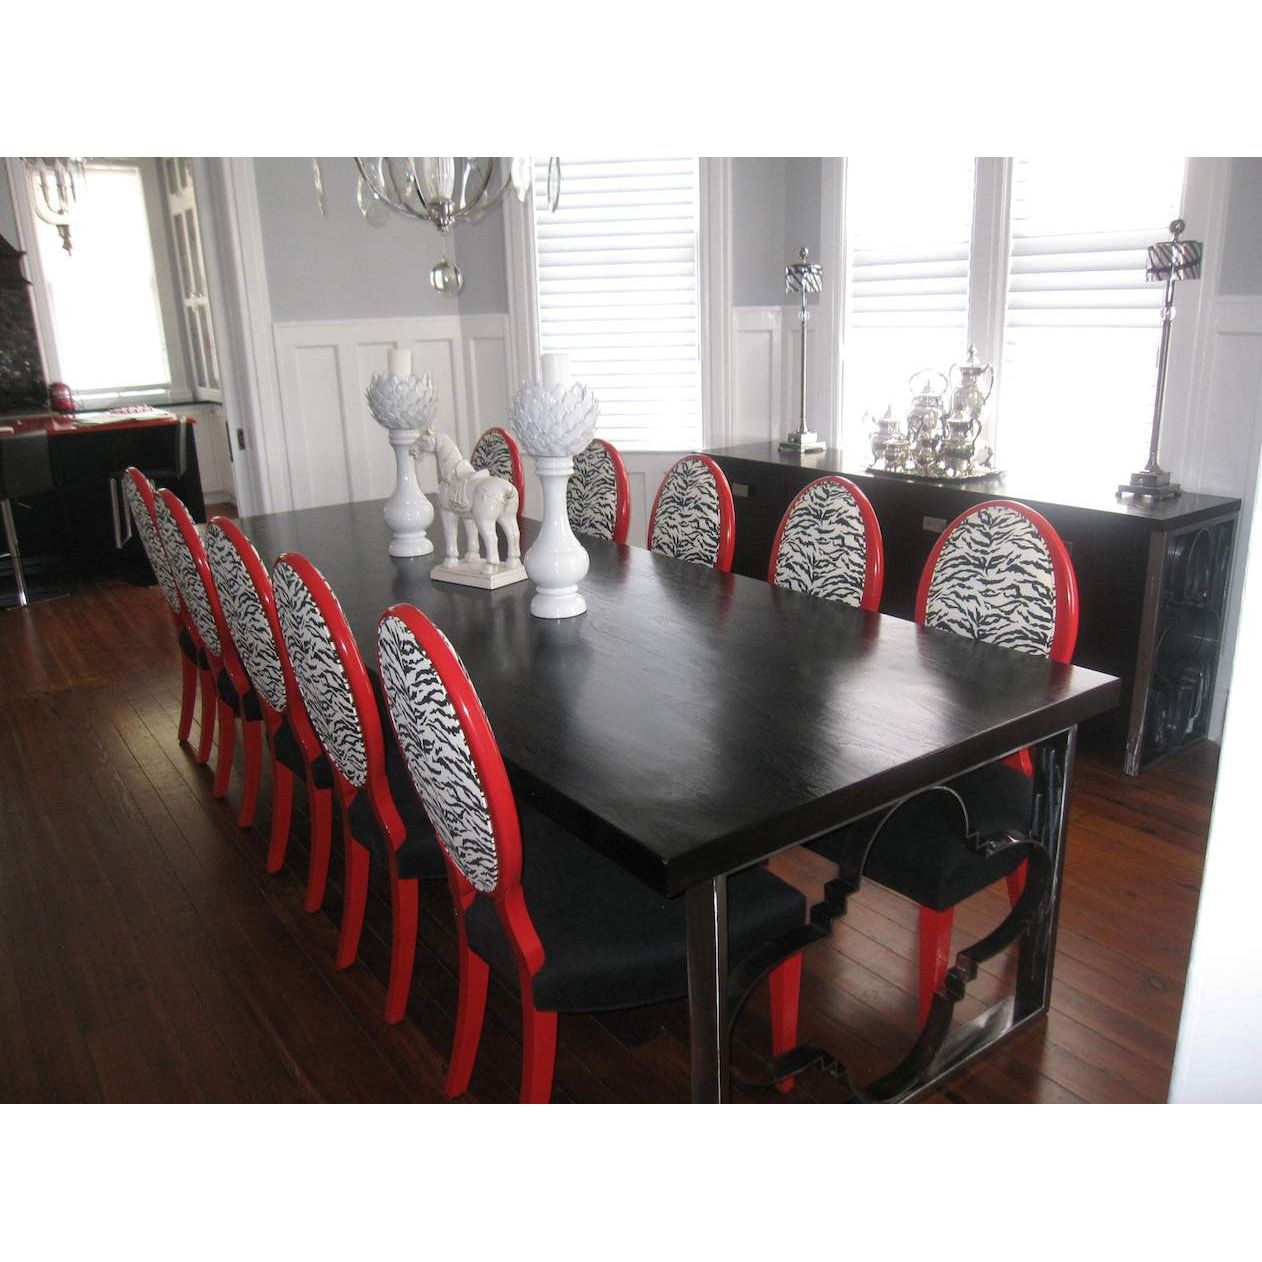 Custom: Dining Table, Buffet, Chairs. Showroom: Tabletop Accessories, Buffet Lamps